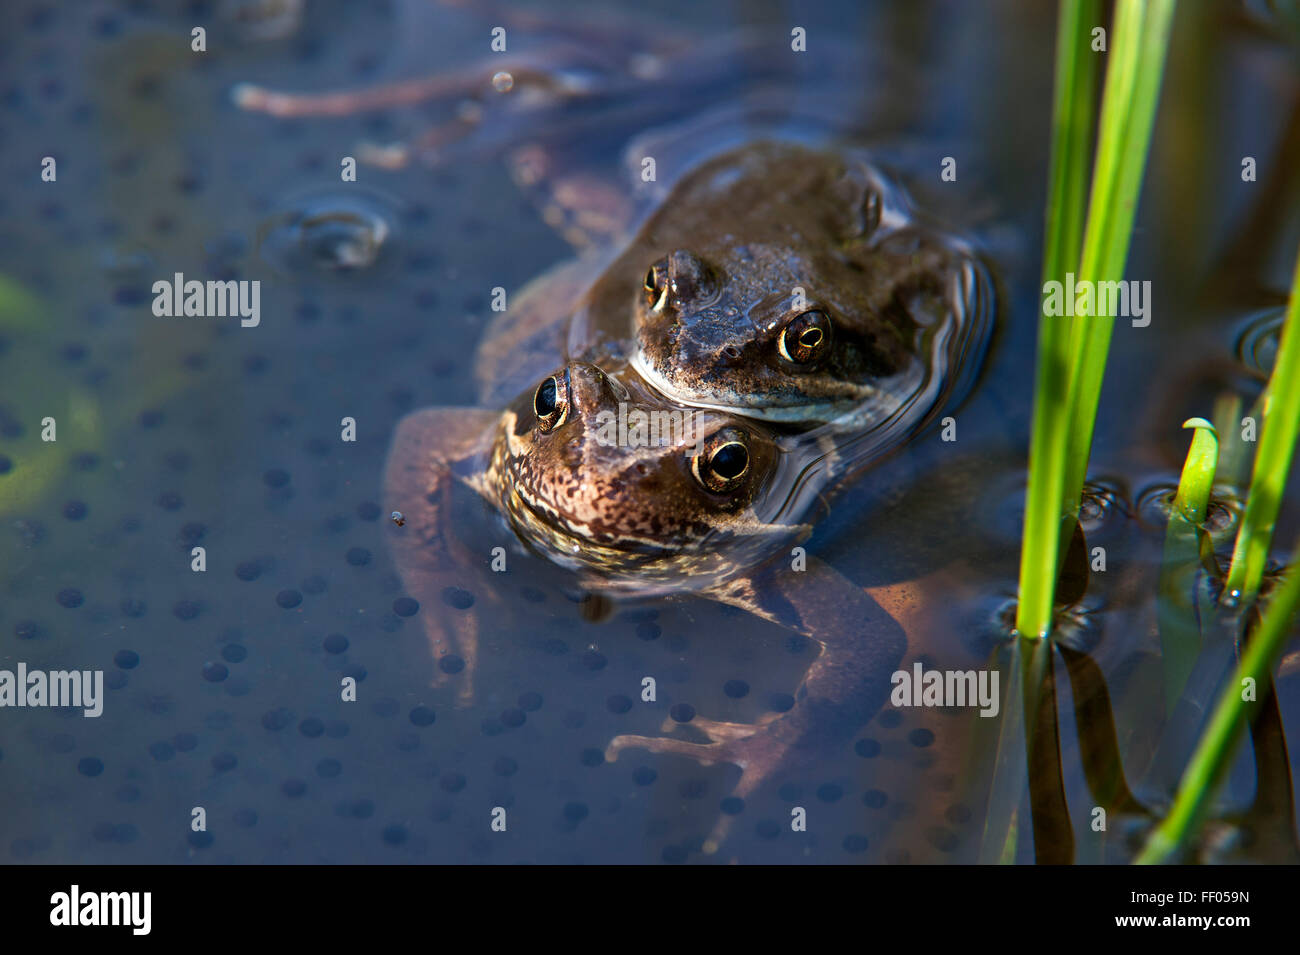 European common brown frogs (Rana temporaria) pair in amplexus floating in pond among frog spawn Stock Photo